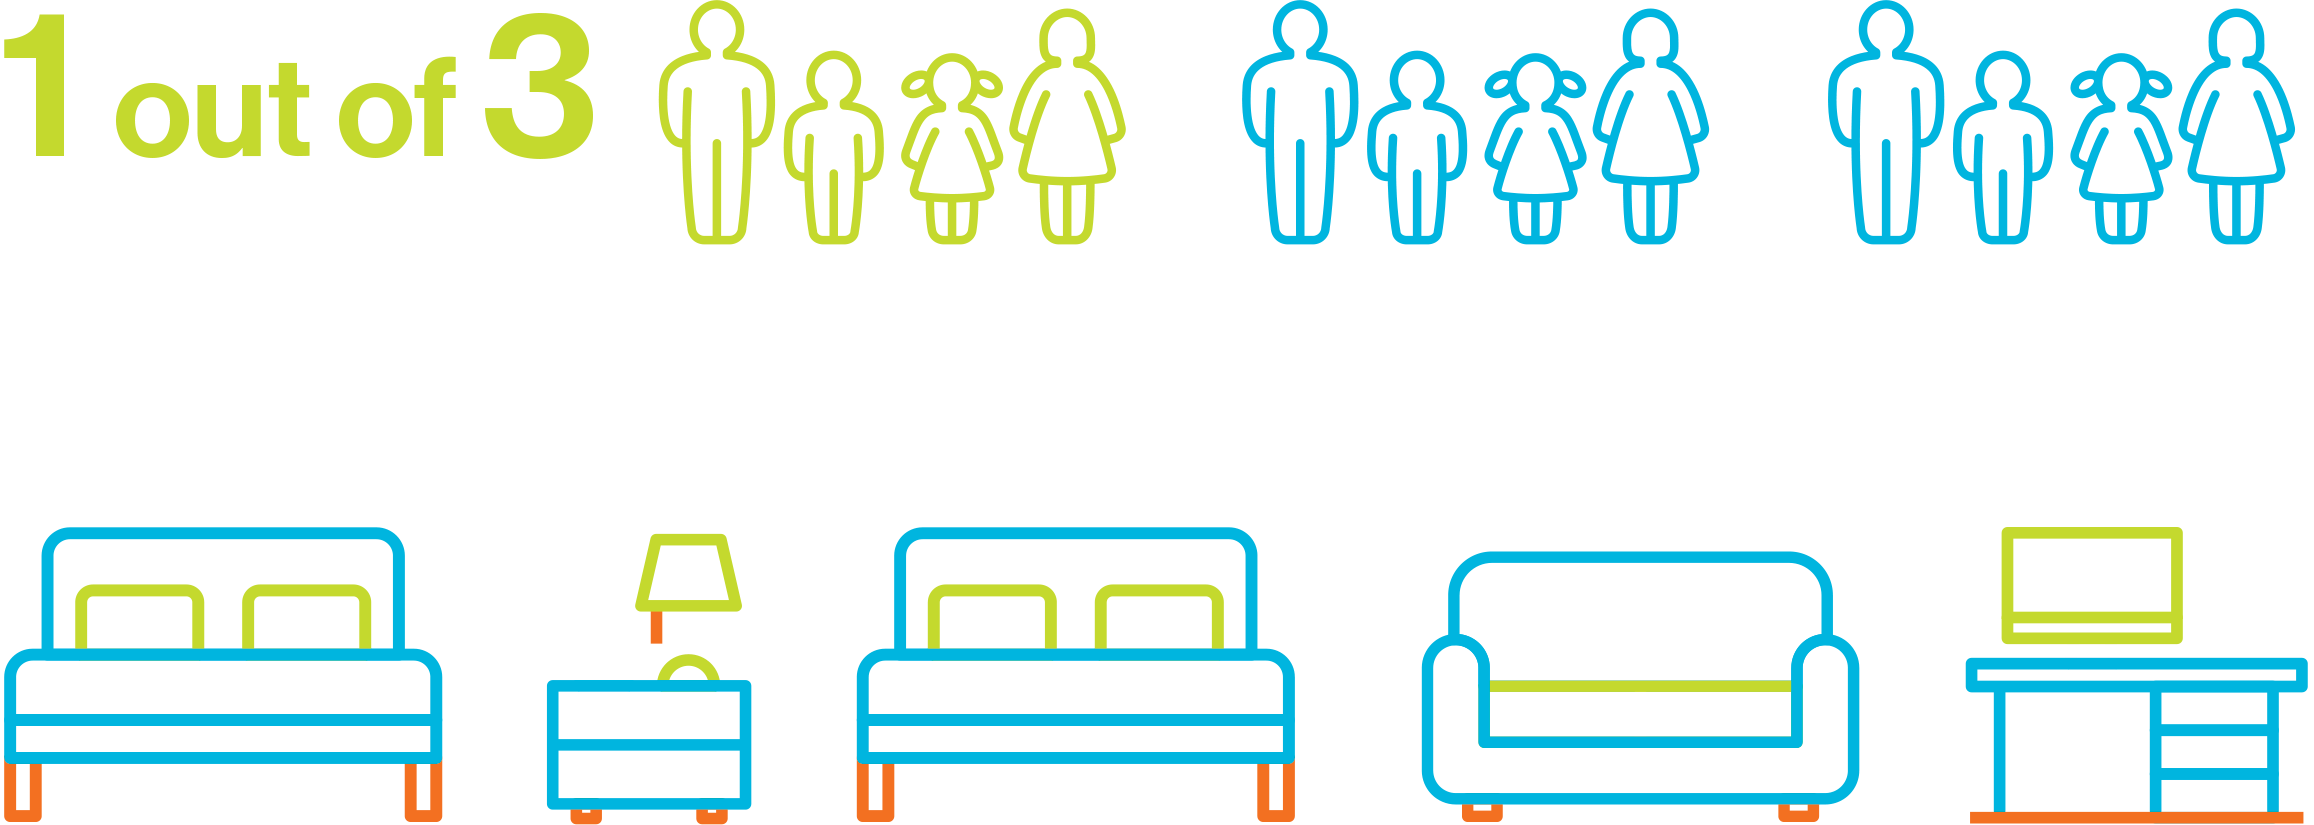 1 out of 3 families in Milwaukee CAN’T AFFORD the average rent for a two bedroom apartment